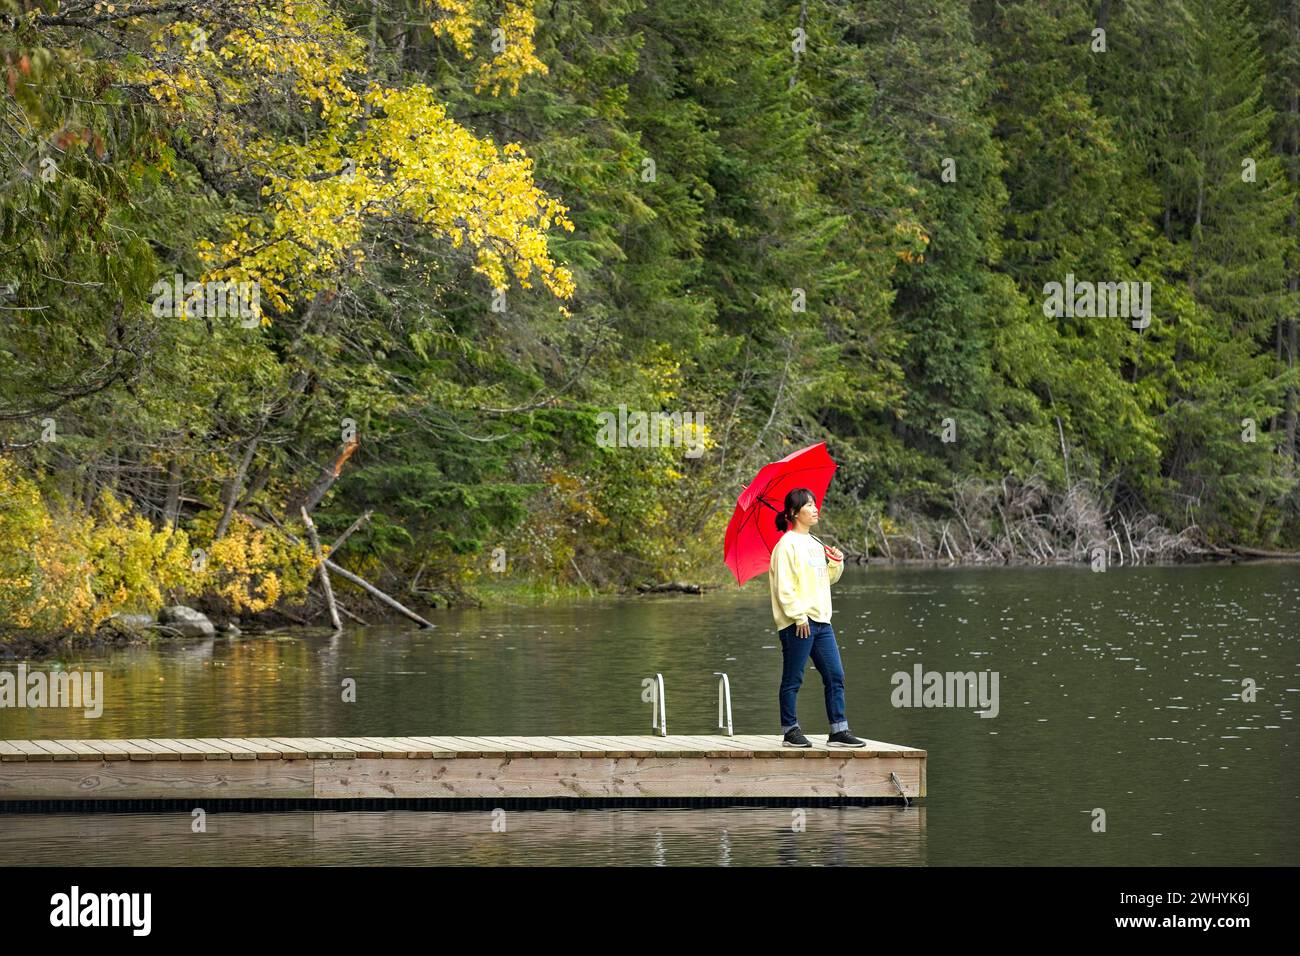 Woman holding umbrella stands on a dock. Stock Photo